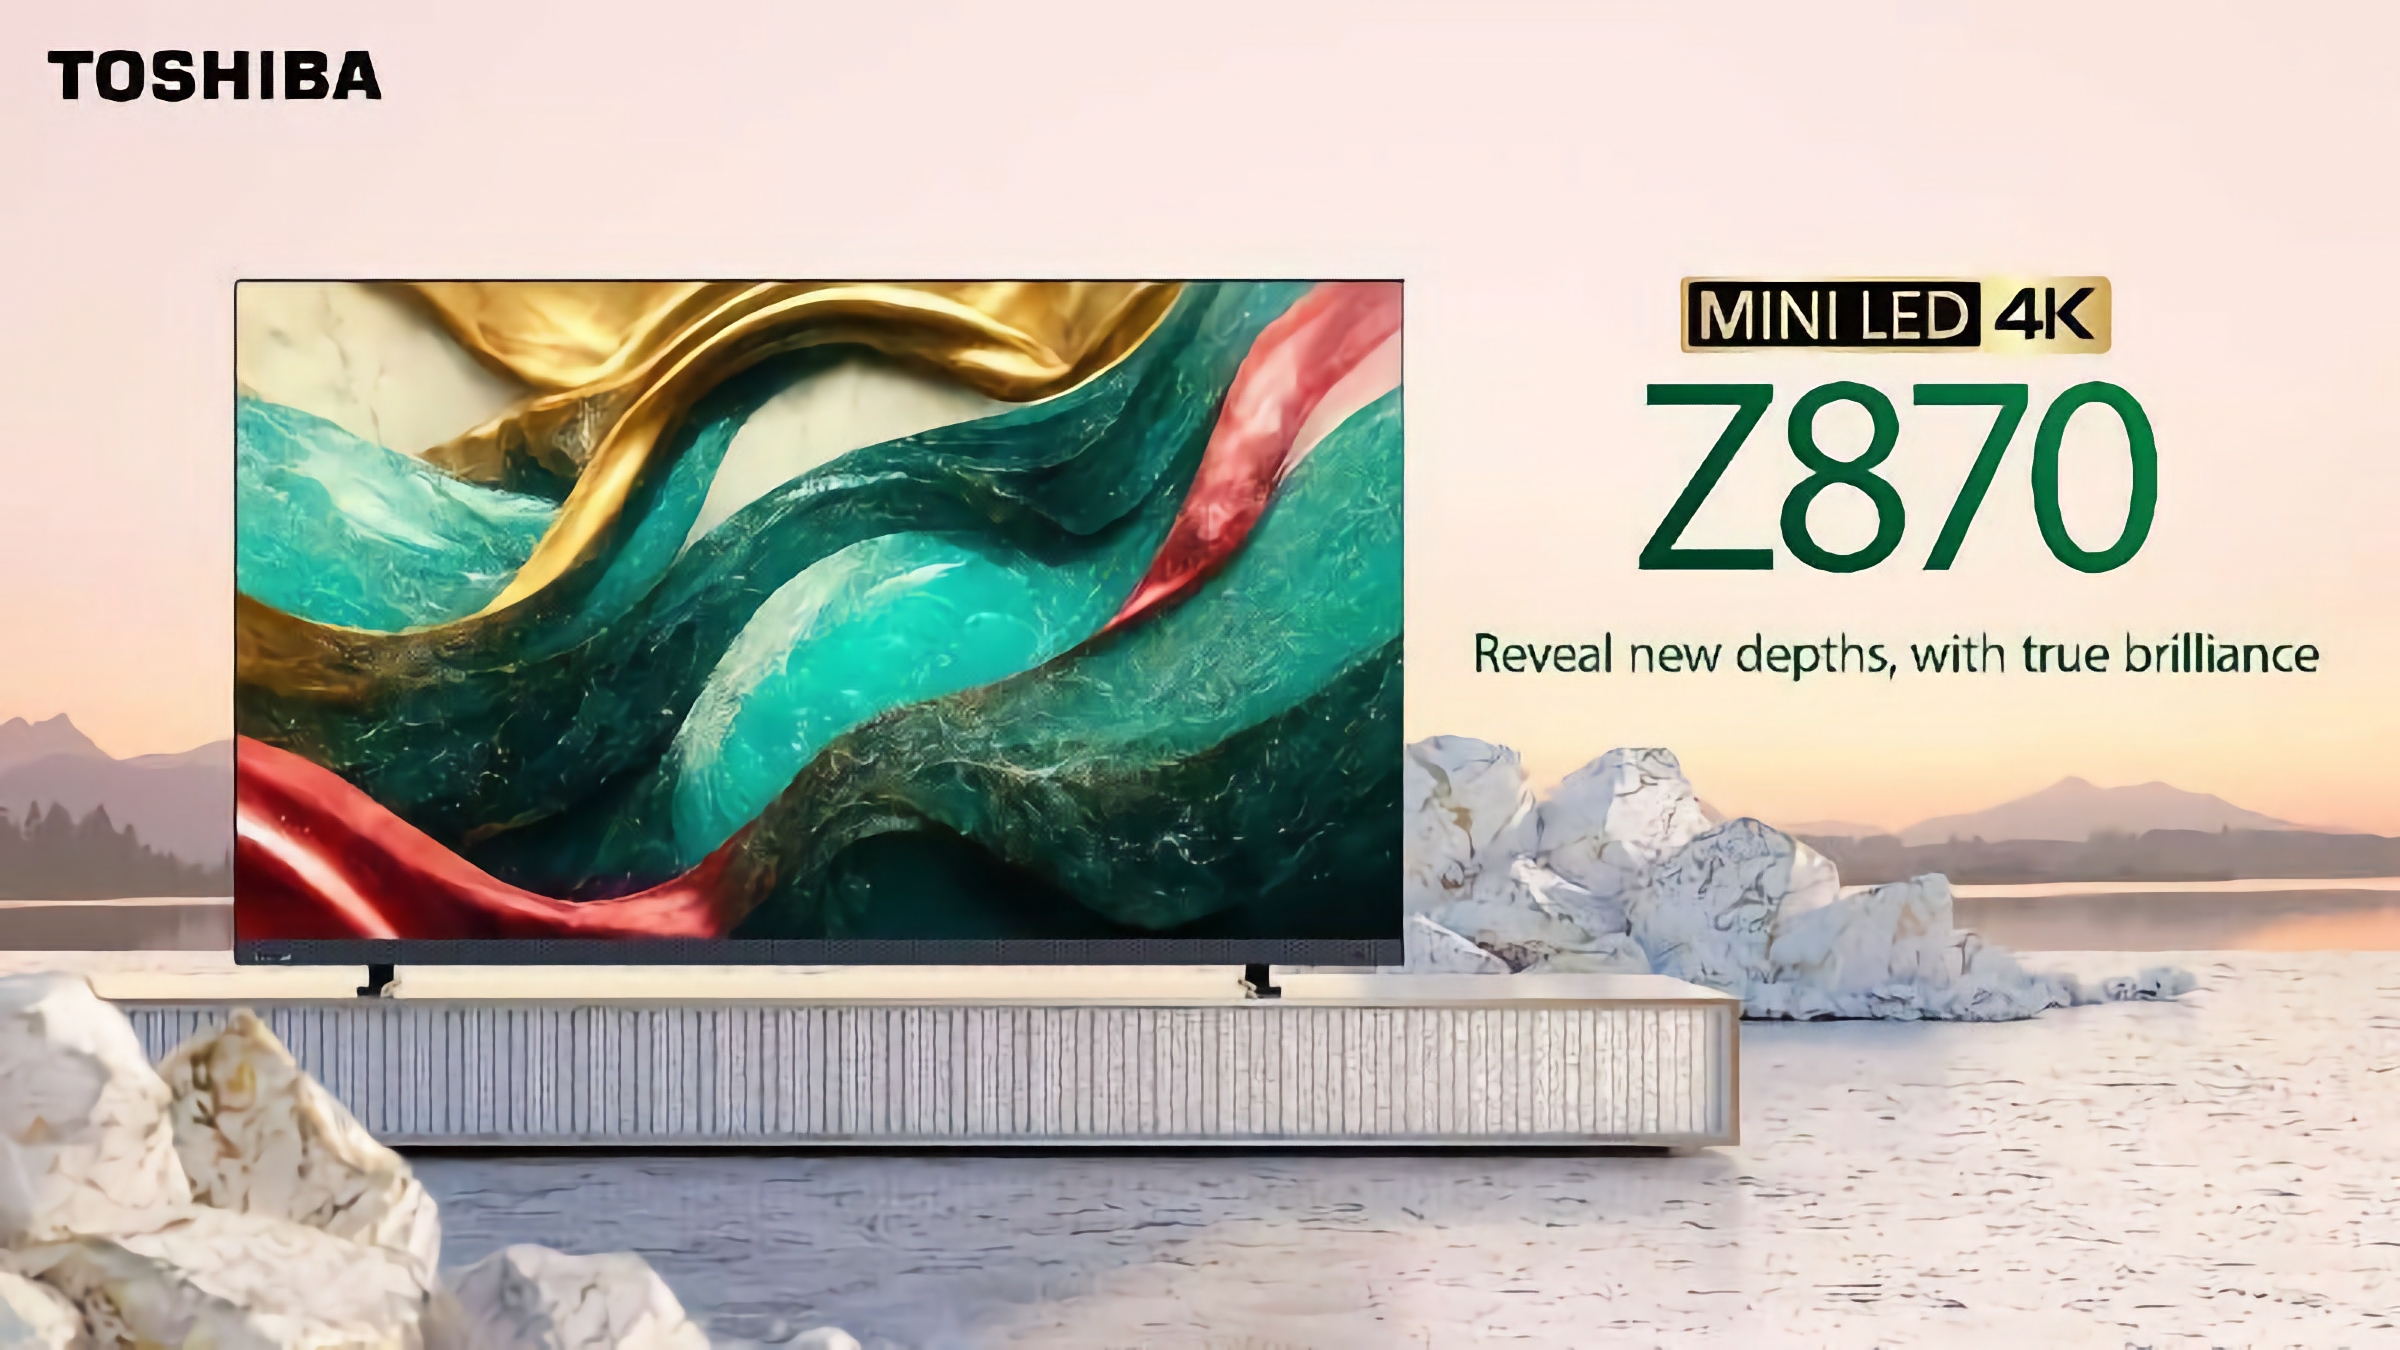 Toshiba Z870 MiniLED 4K Gaming TV: A gaming range of smart TVs with 144Hz support and AMD FreeSync technology